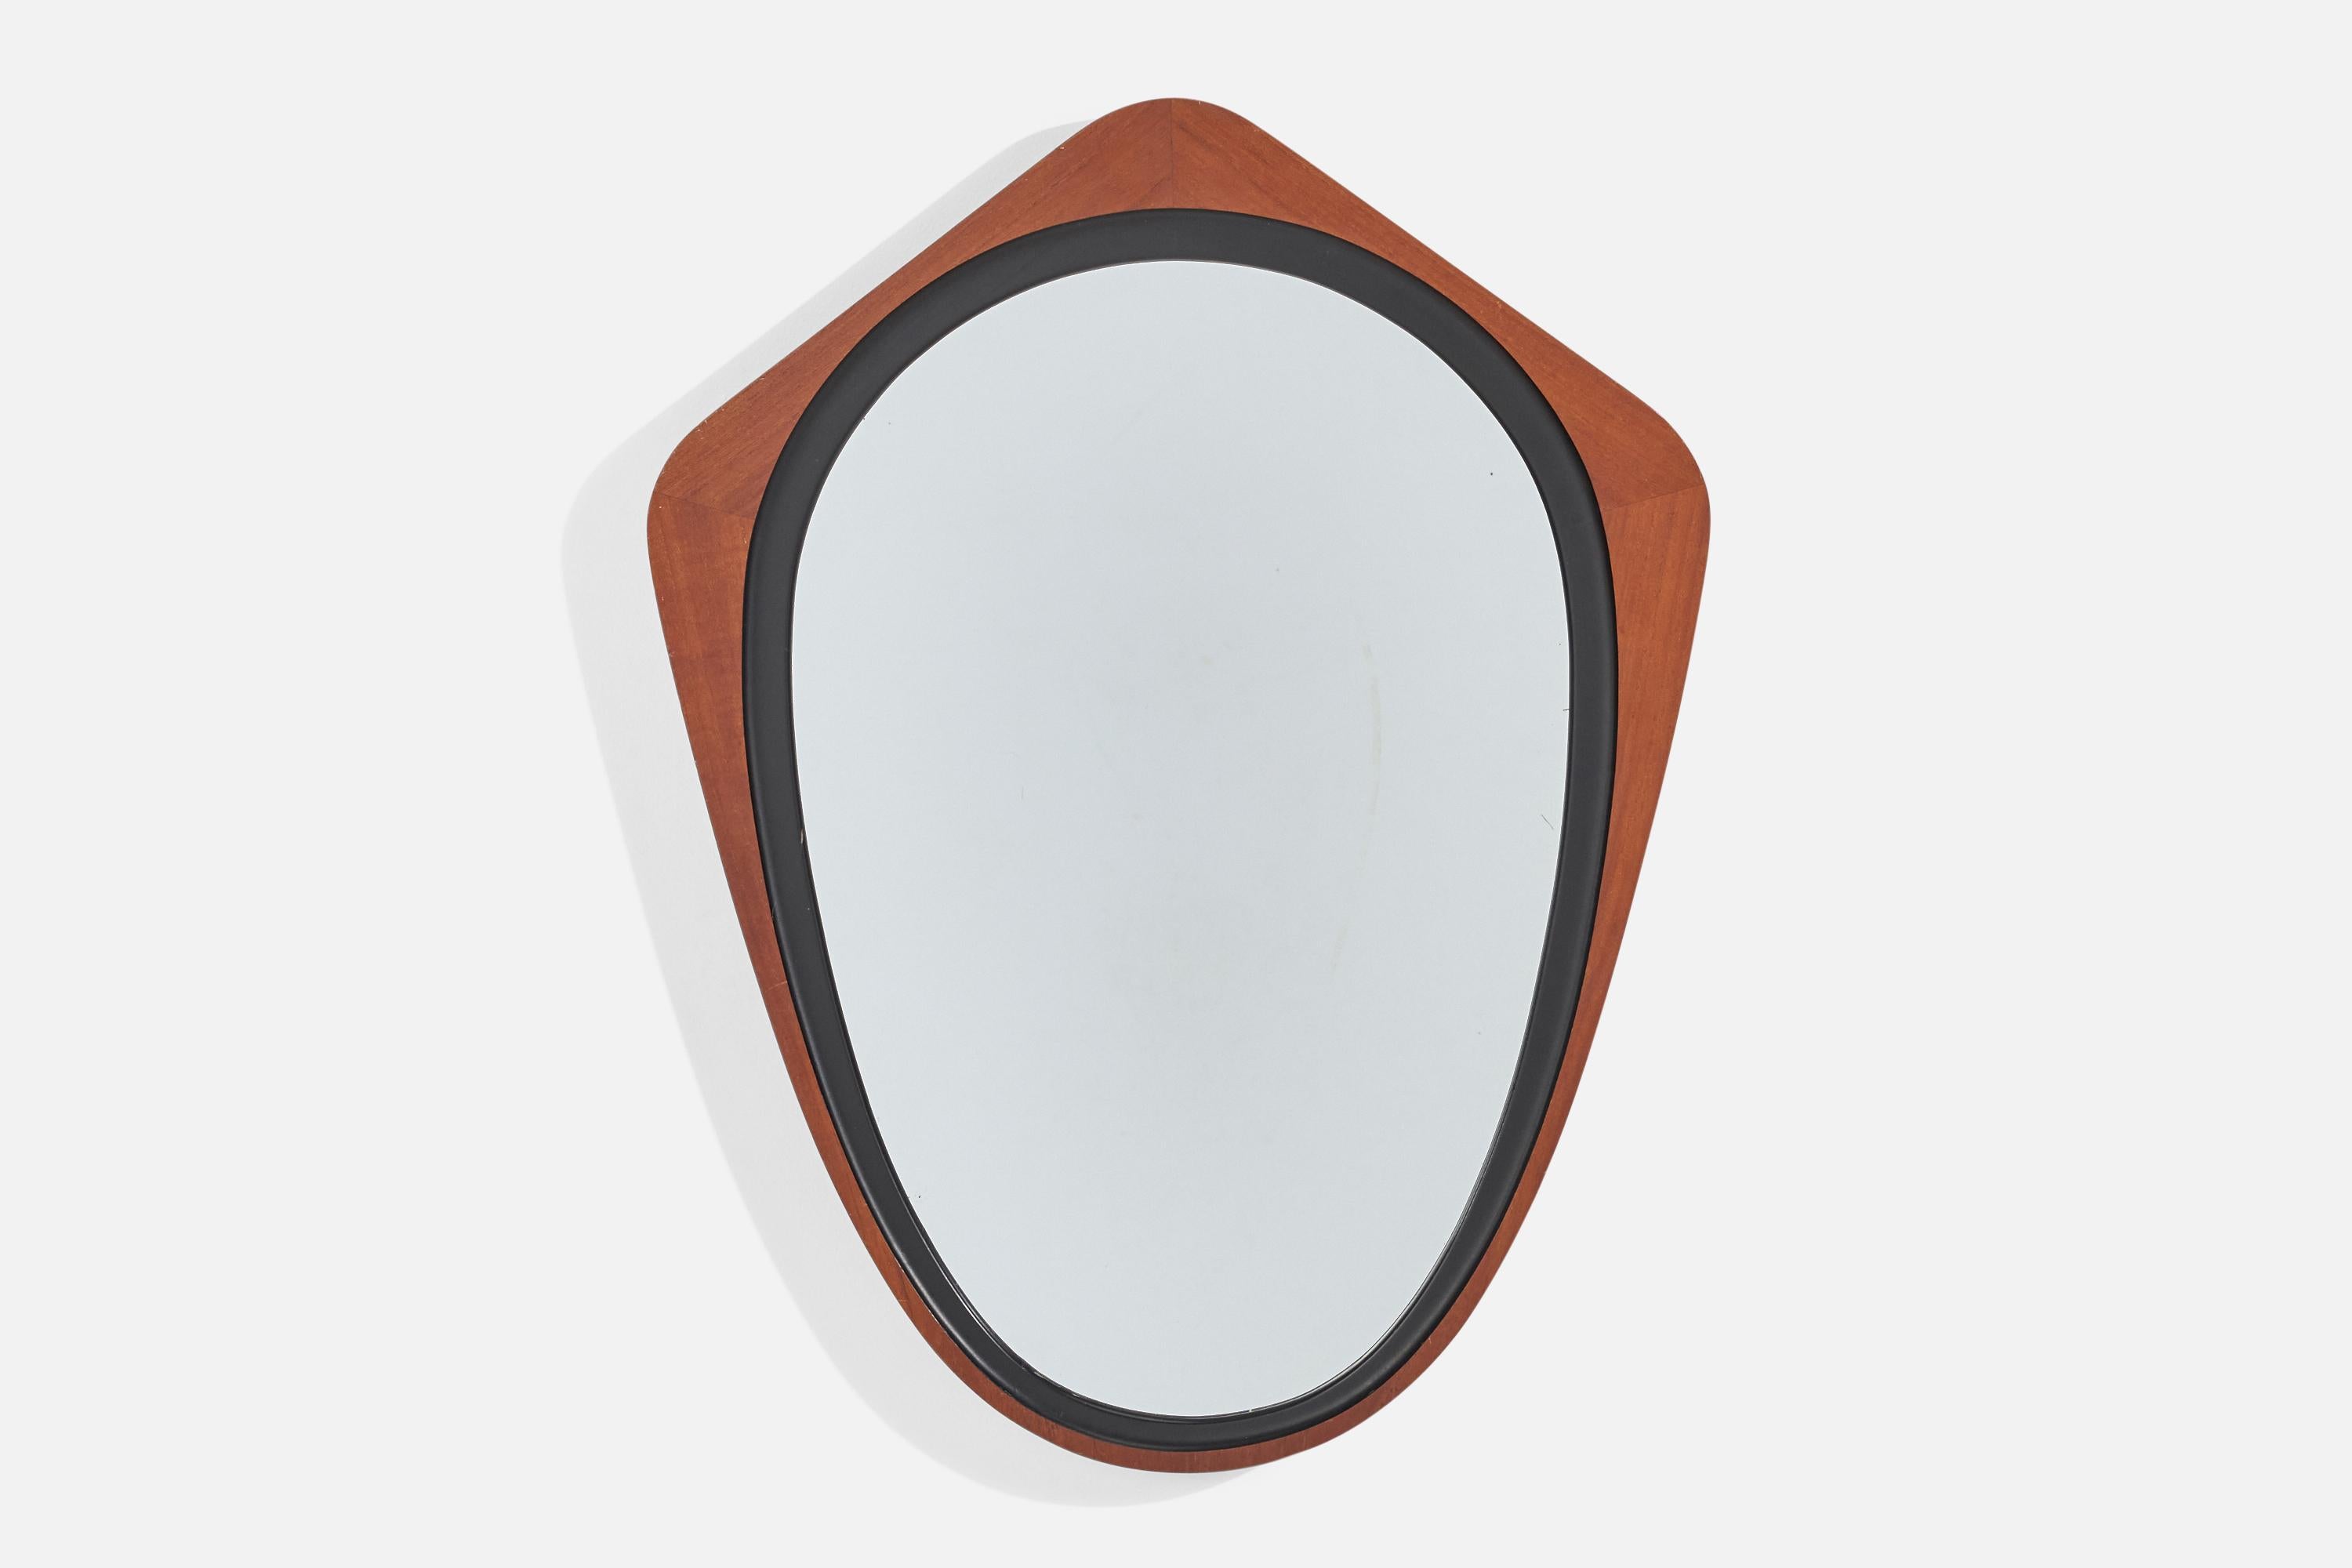 Mid-Century Modern Glas & Trä, Wall Mirror, Rosewood, Black-Painted Wood, Hovmantorp, Sweden, 1950s For Sale